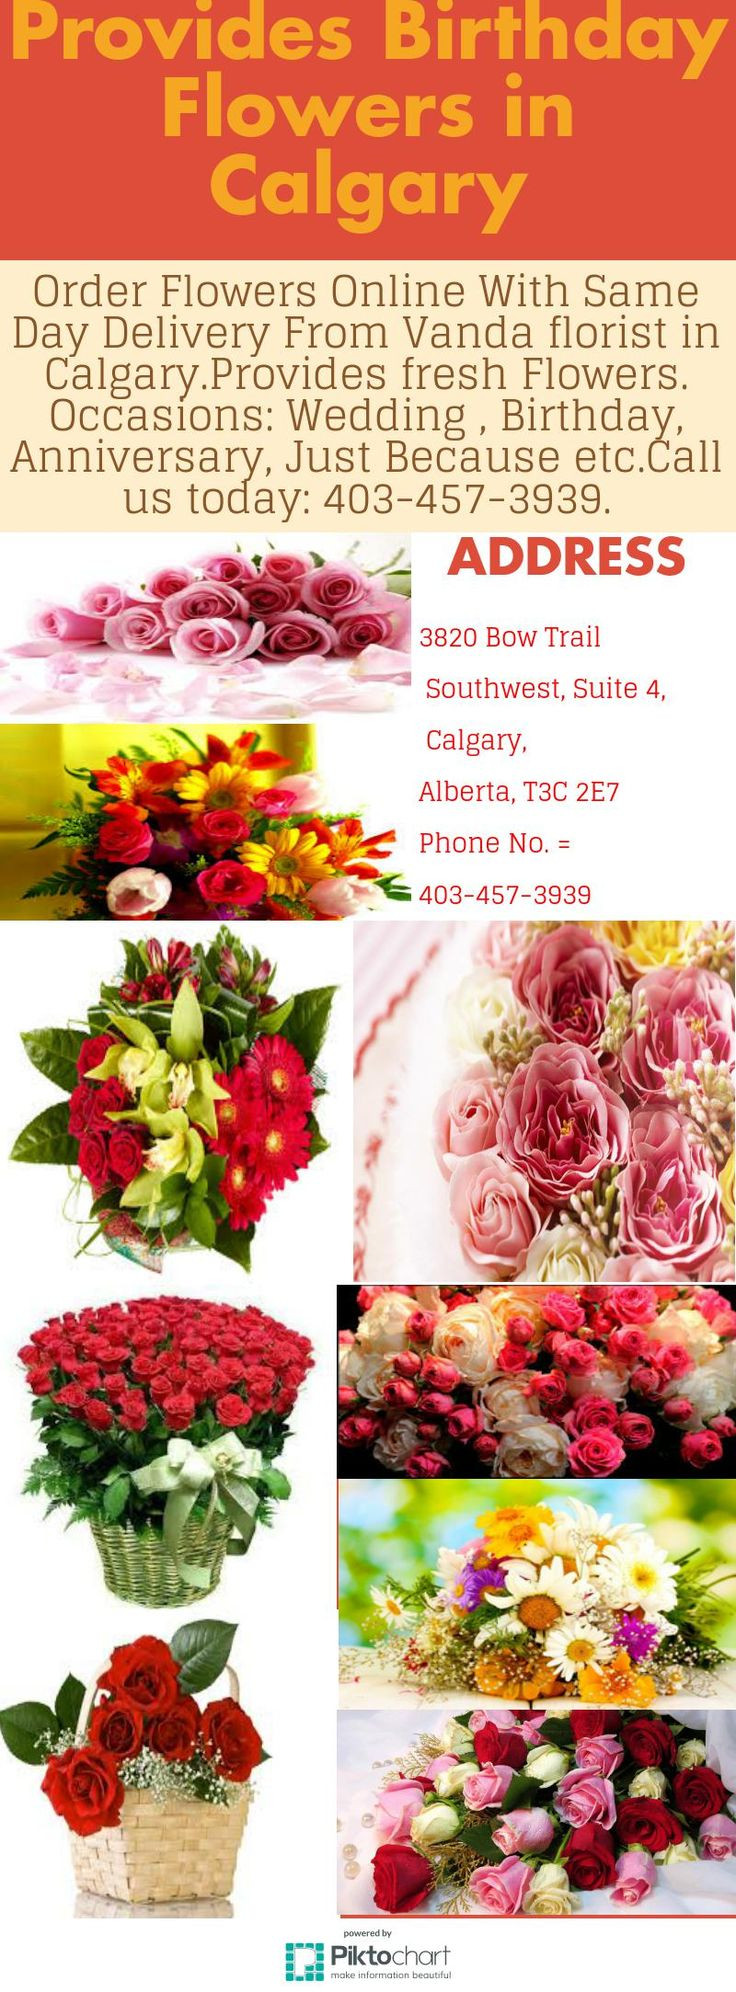 Christmas Day Flower Delivery
 Best 25 Same day flower delivery ideas on Pinterest